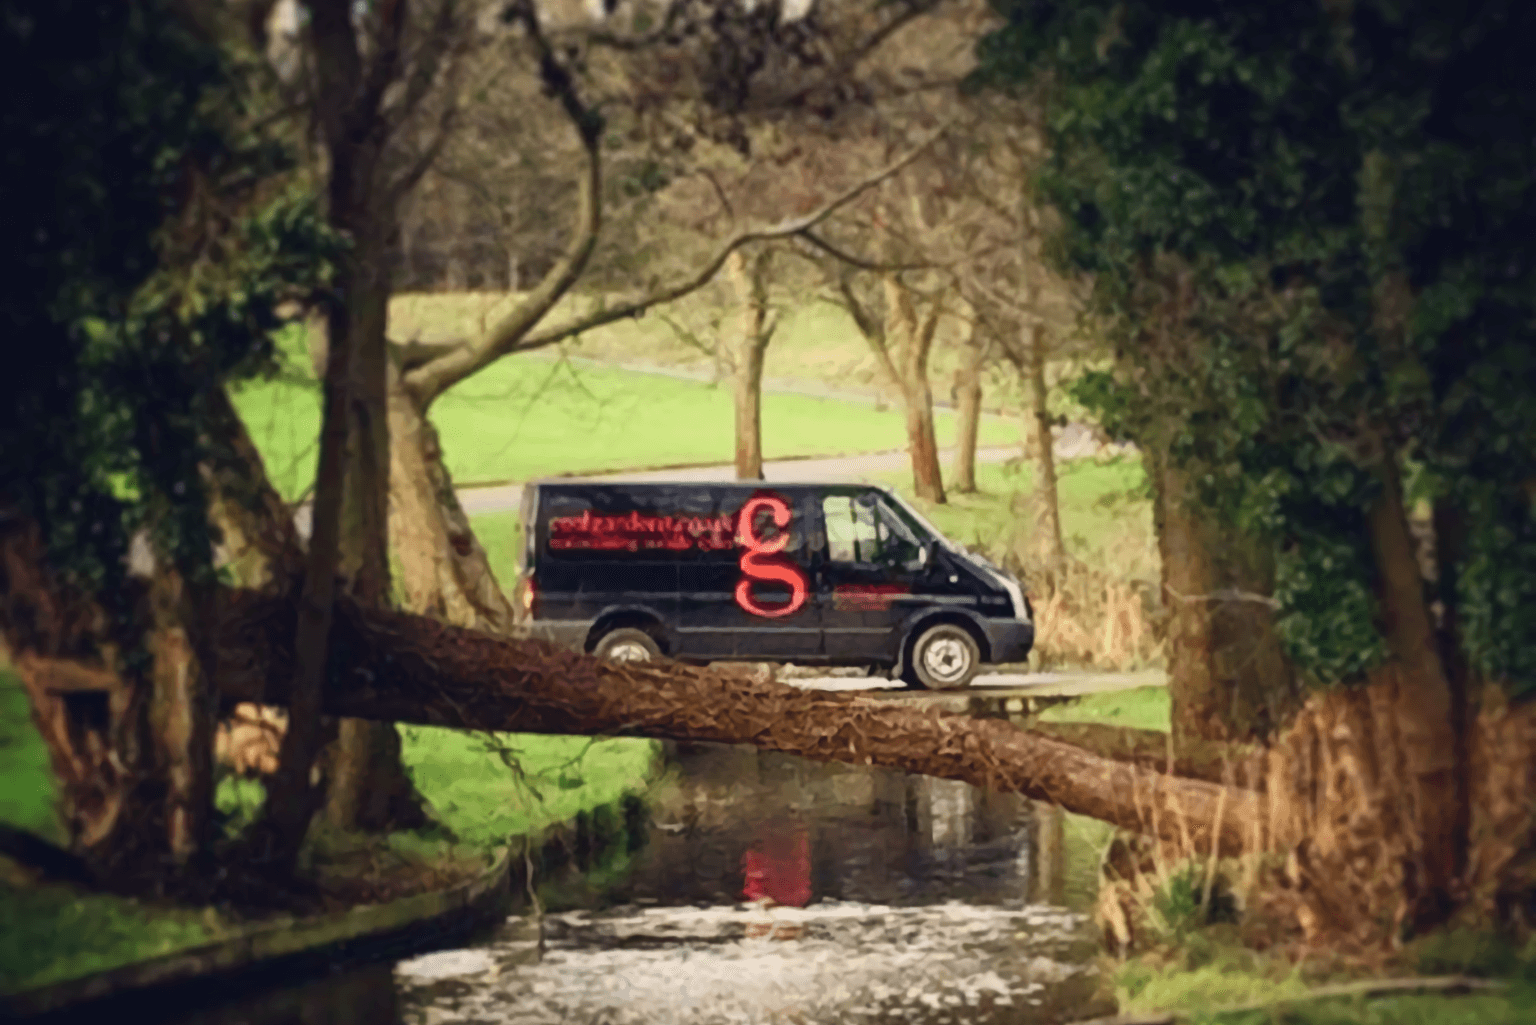 A black and red cool gardens van parked next to a river with trees